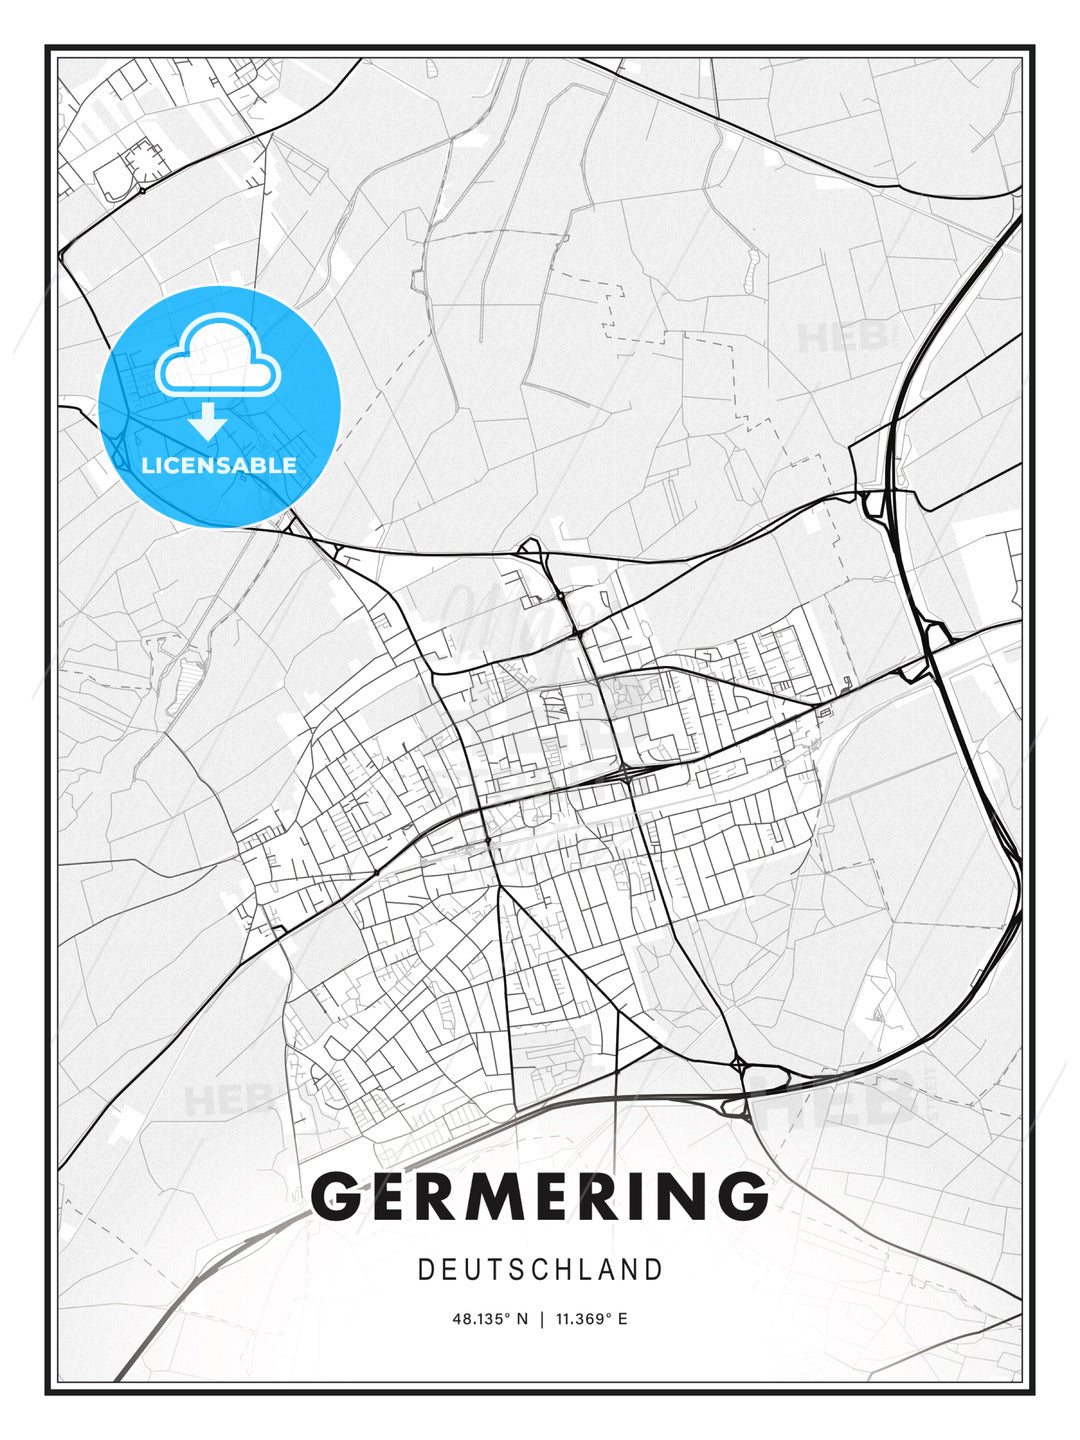 Germering, Germany, Modern Print Template in Various Formats - HEBSTREITS Sketches